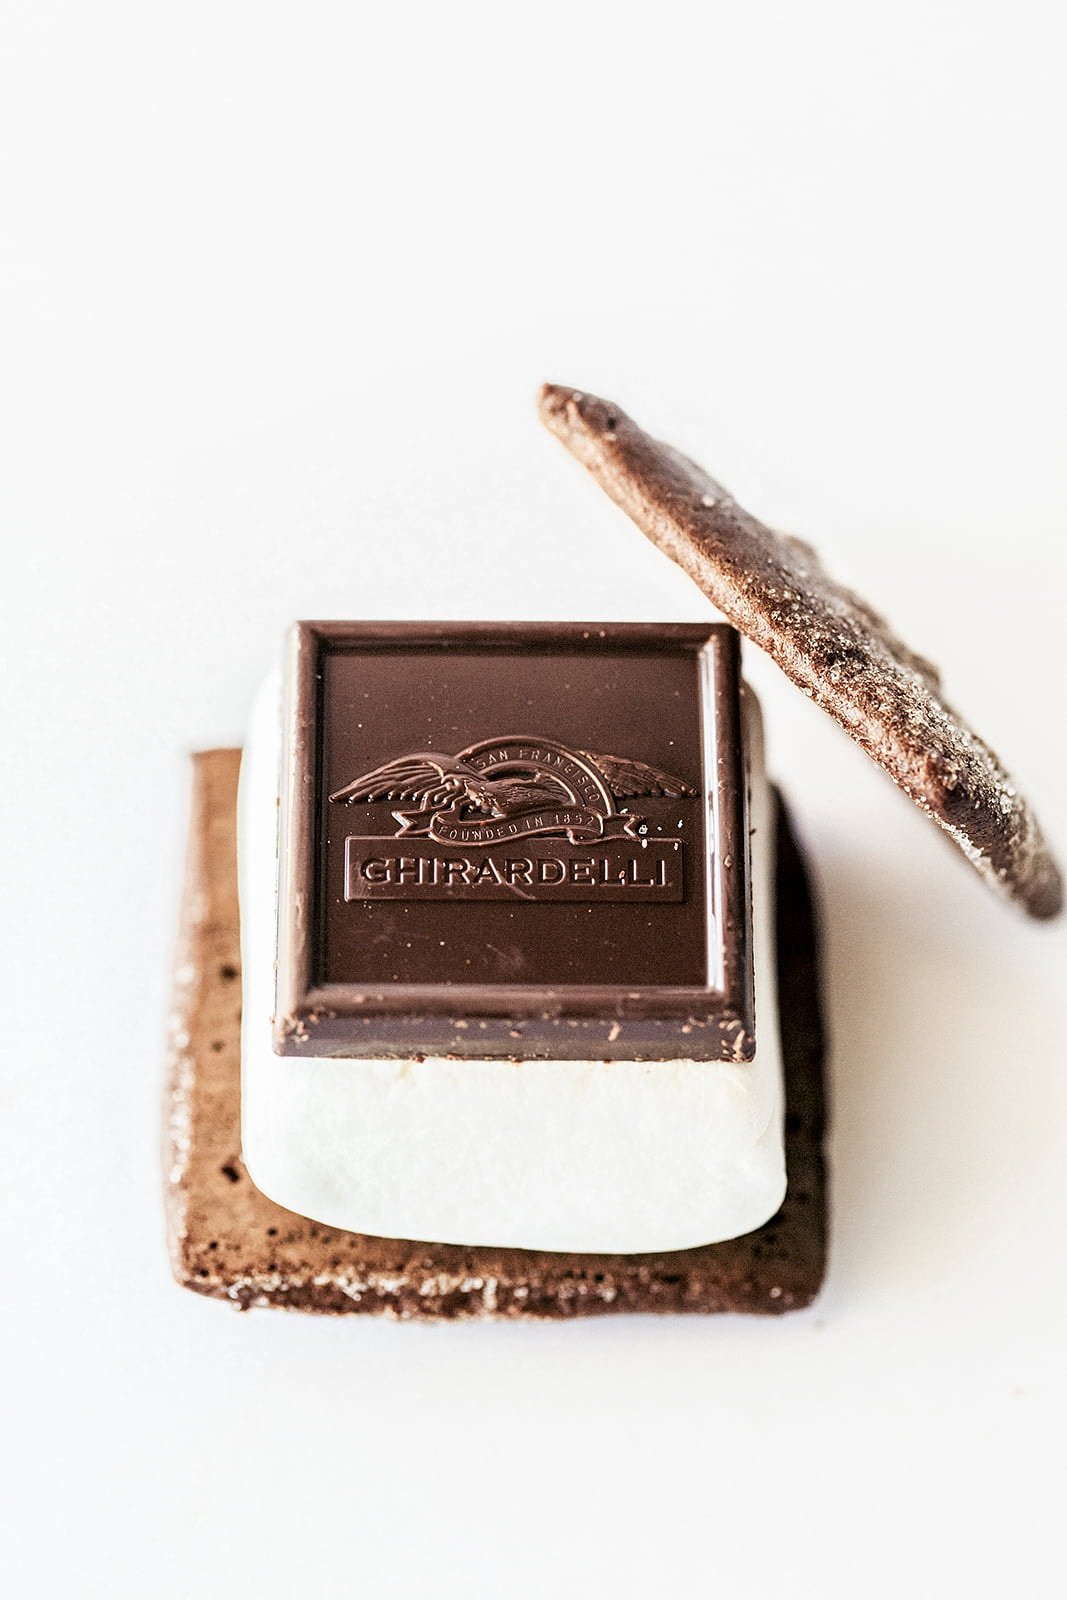 Take s'mores to a whole new level with homemade chocolate graham crackers and Ghirardelli SQUARES!